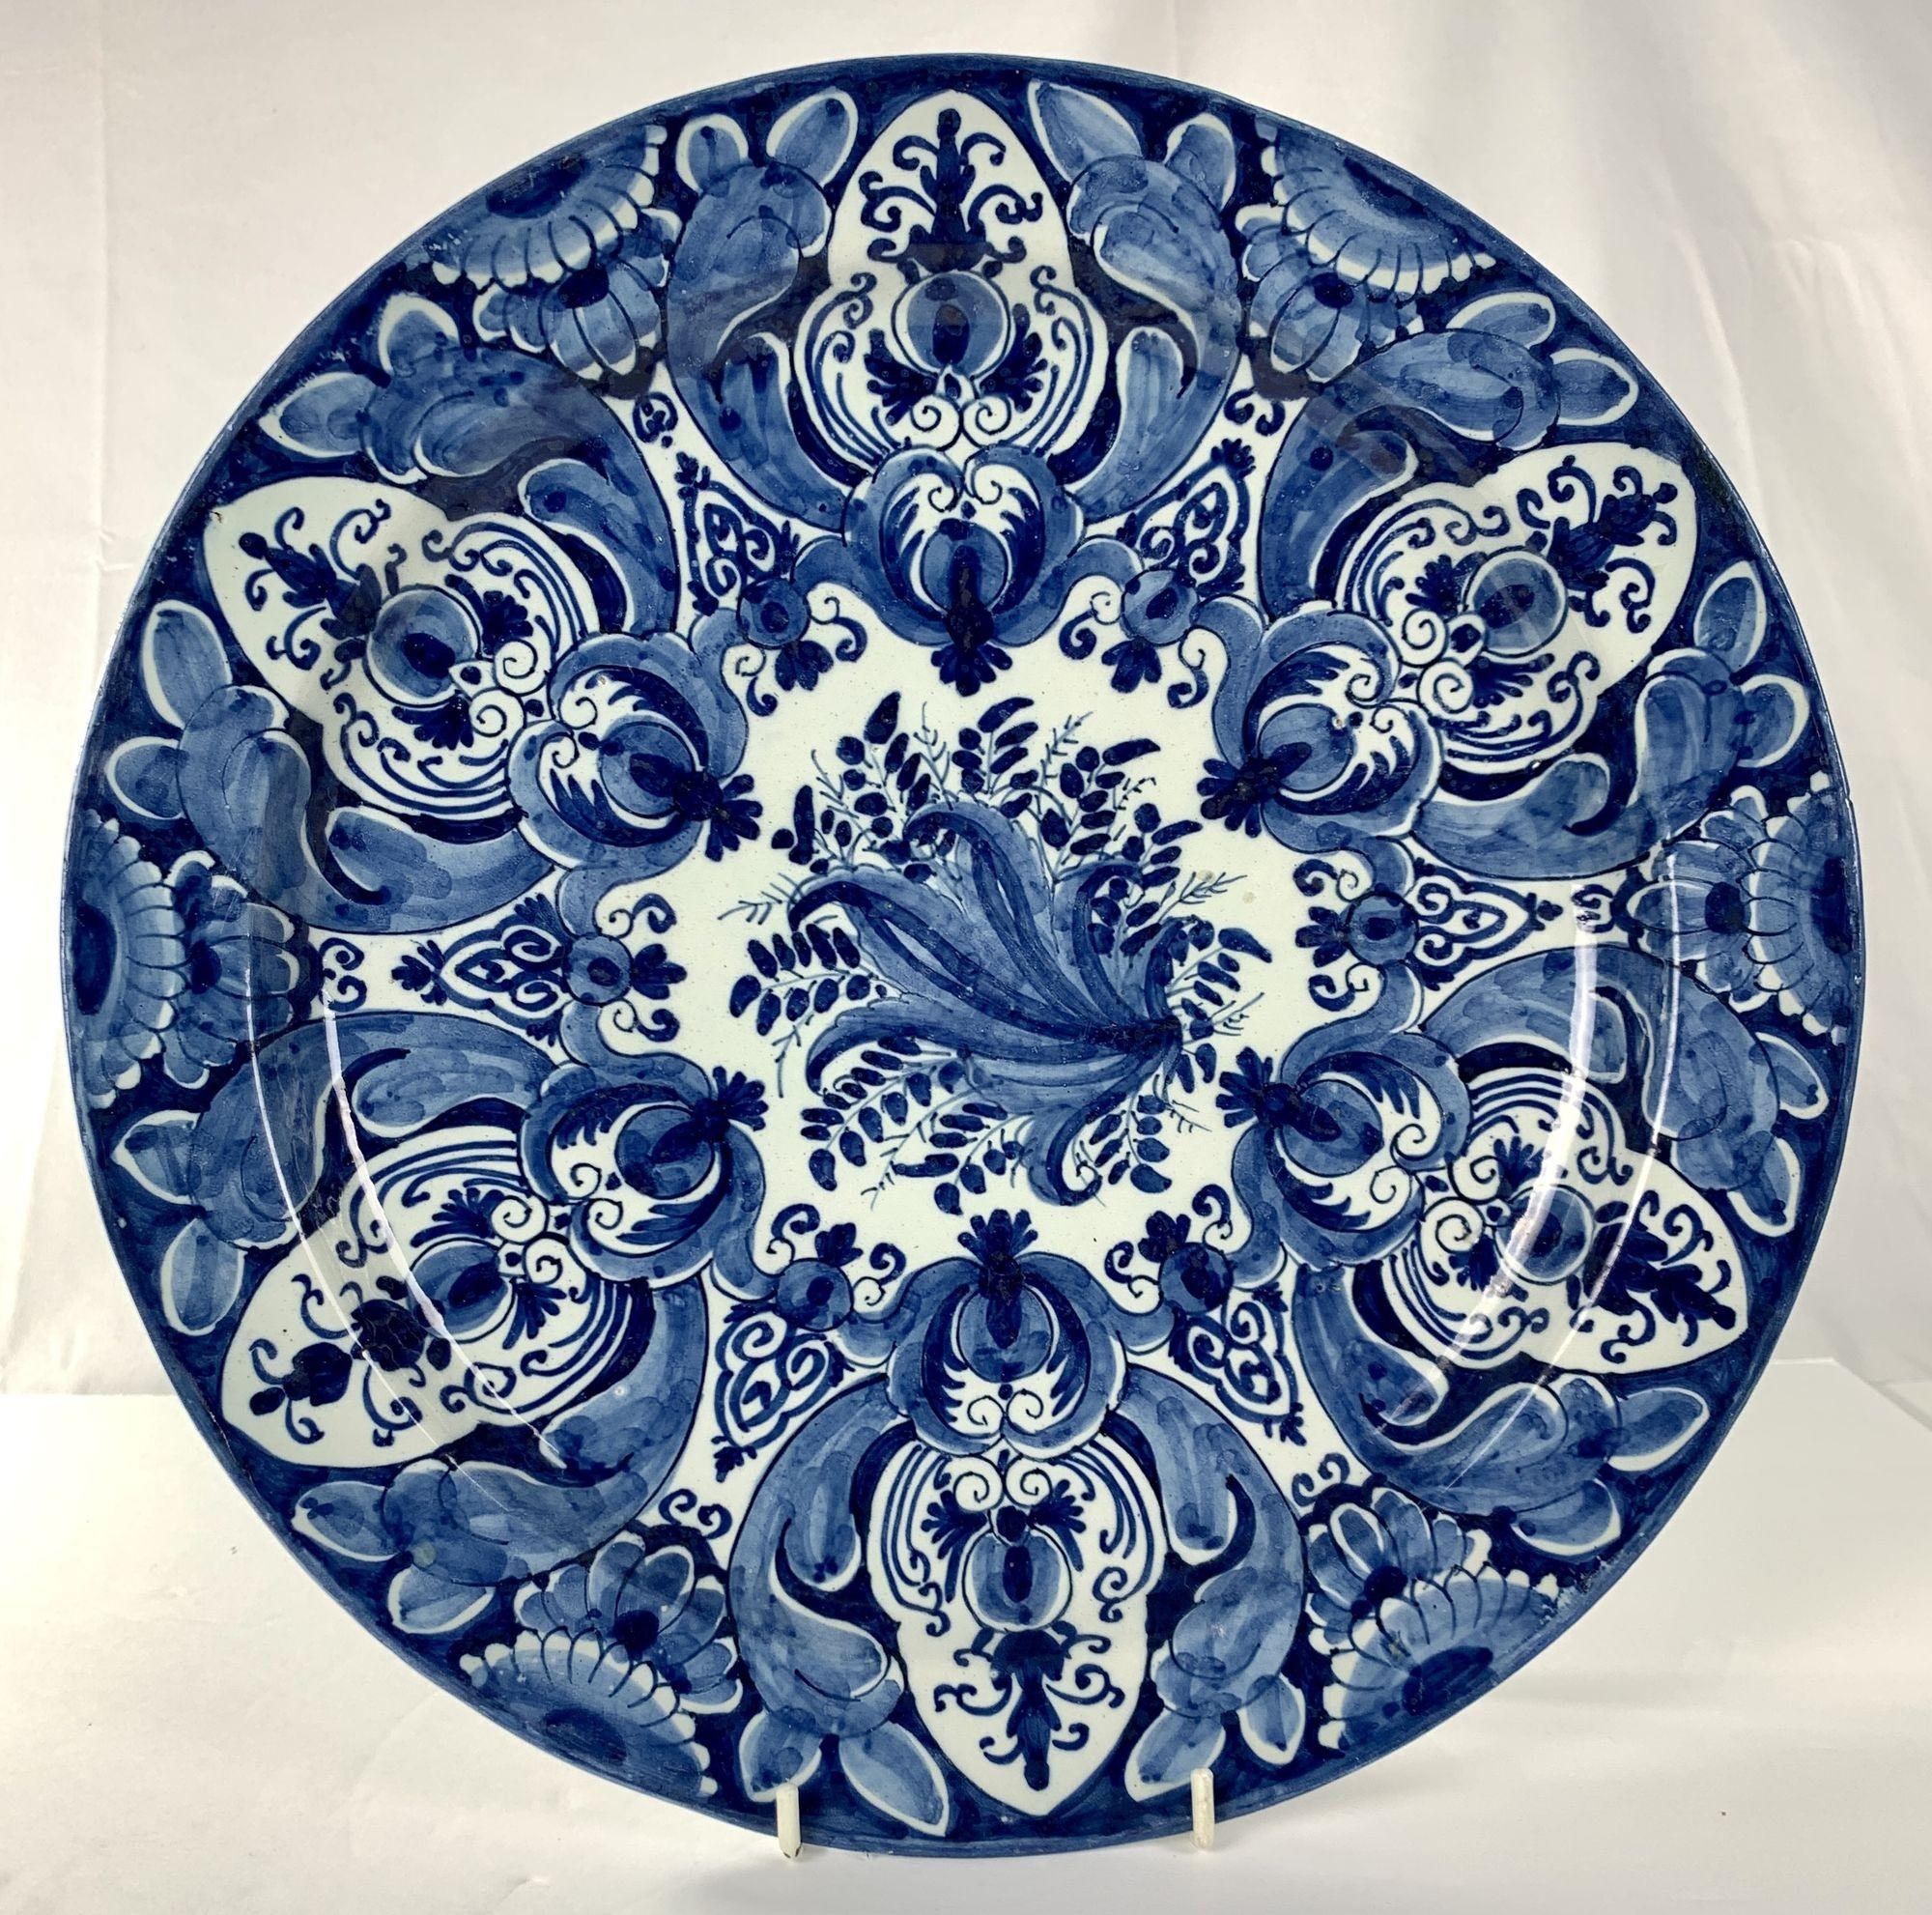 This pair of blue and white Delft chargers were made at De Metalen Pot in the Early 18th century circa 1710.
The chargers were hand-painted in deep cobalt blue.
We see an eye-catching, symmetrical floral pattern with flowers, budding flowers, and